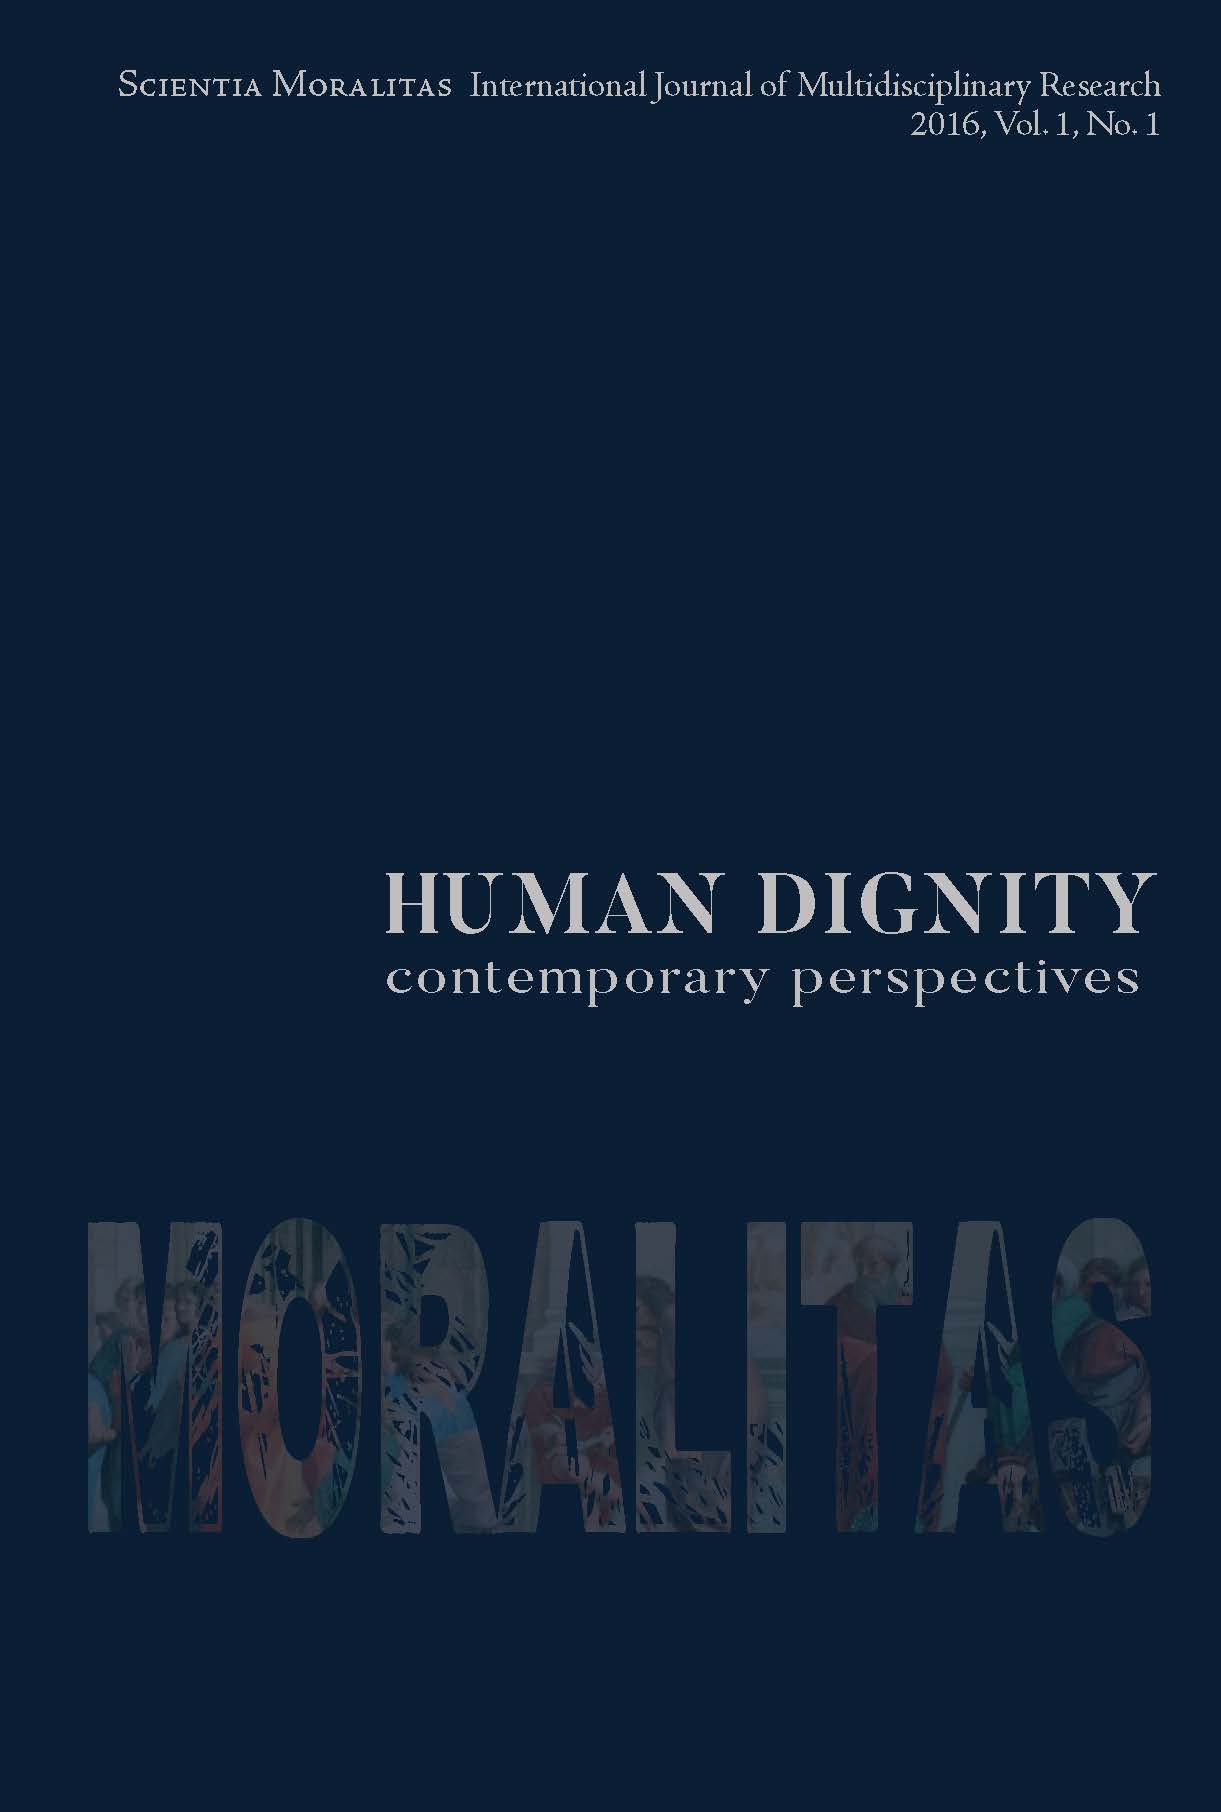 Digital Humanities Culture:
Enabler or Obstacle for the
Development of Human Dignity? Cover Image